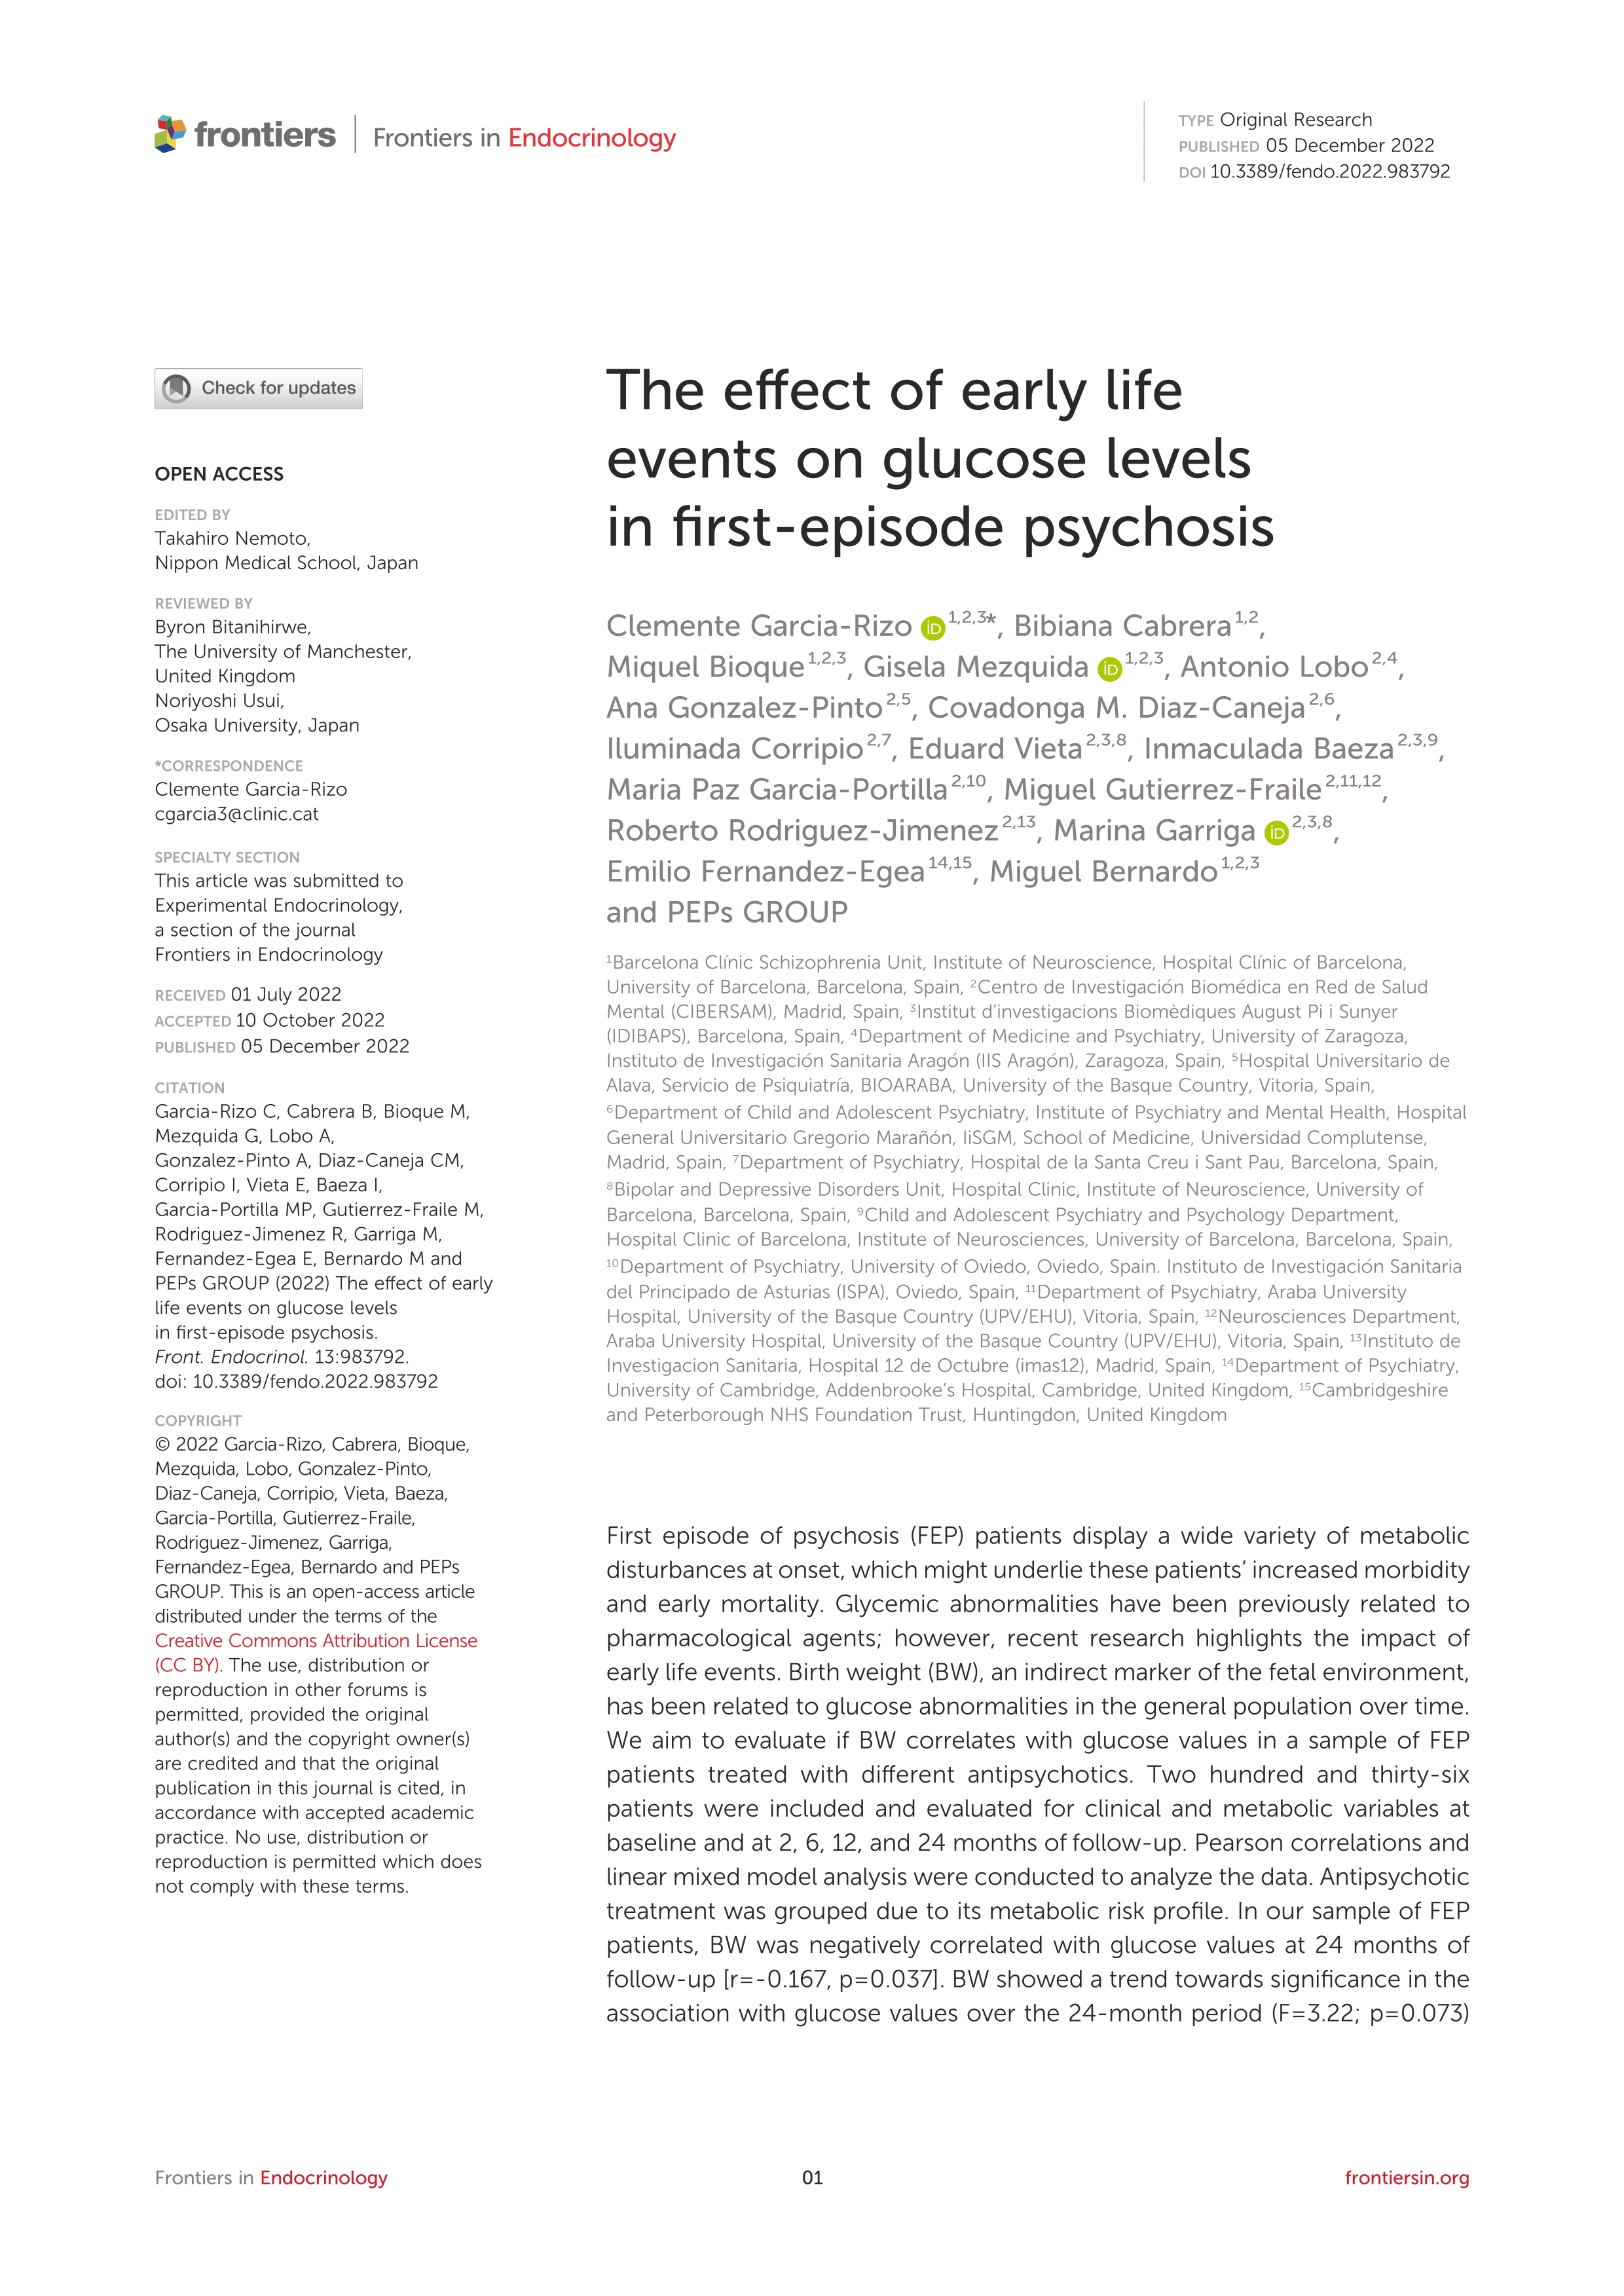 The effect of early life events on glucose levels in first-episode psychosis